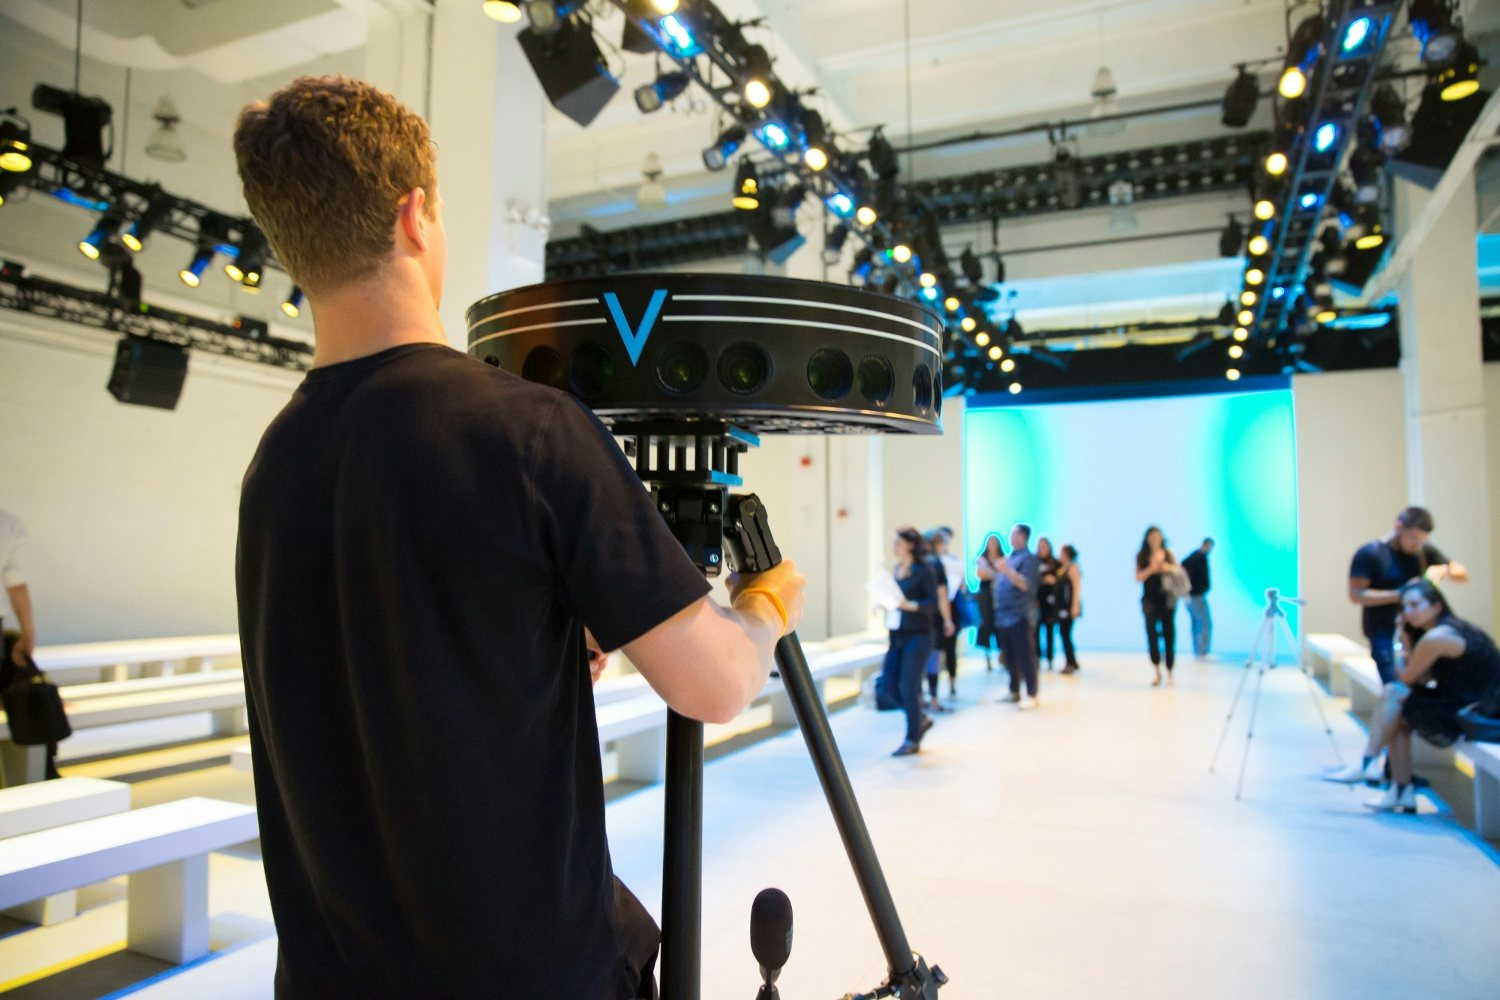 At New York Fashion Week, 13 designers teamed up with Intel and VOKE to live-broadcast their runway shows in full stereoscopic virtual reality. (Intel Corporation)